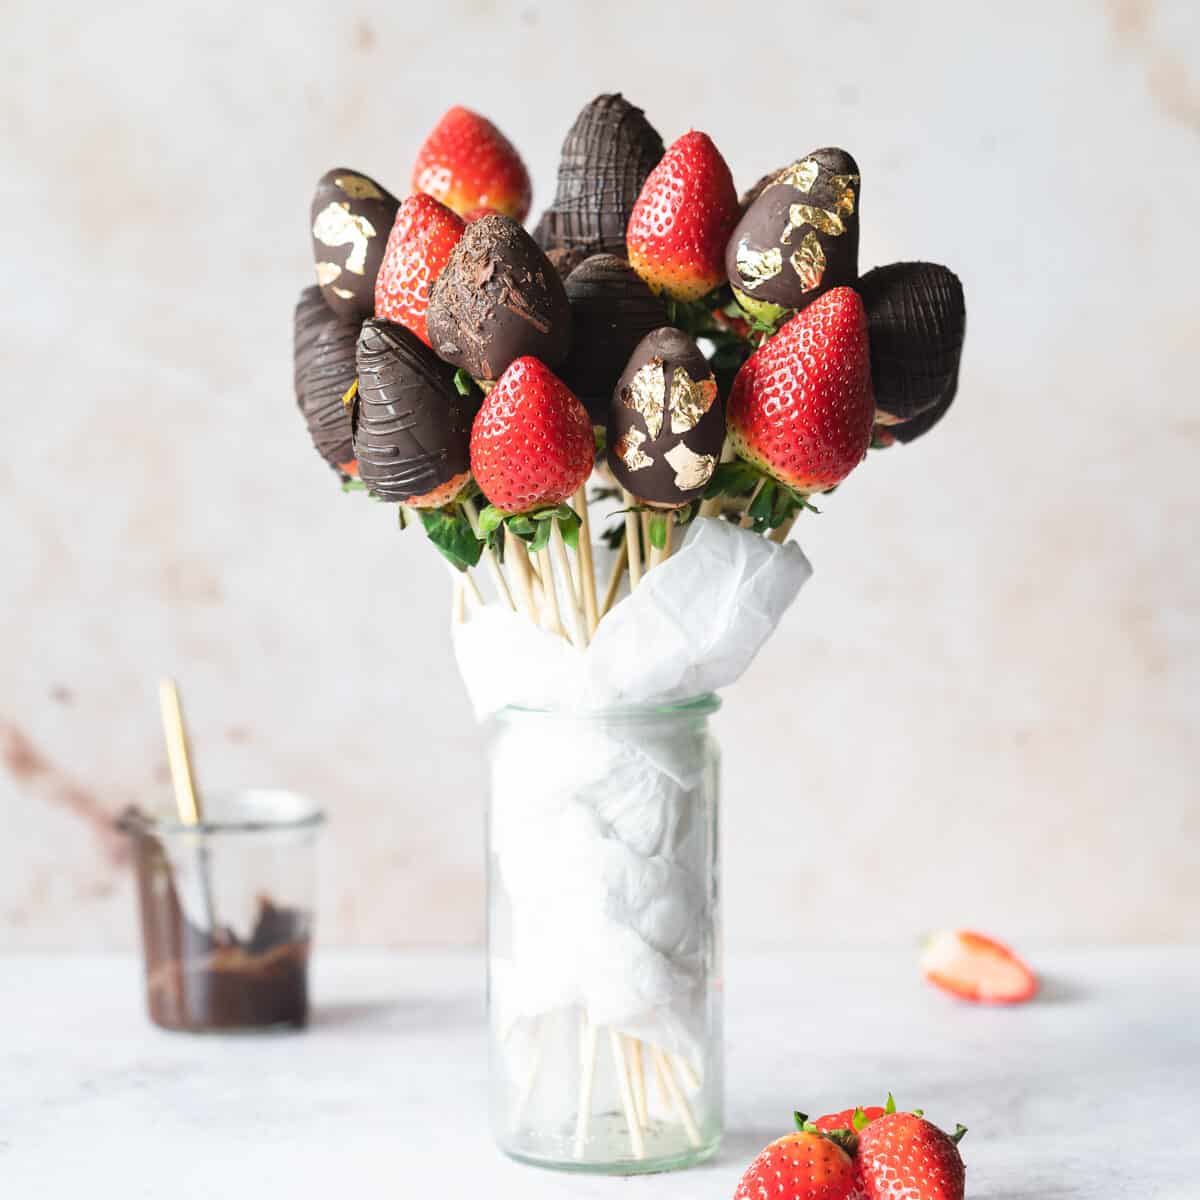 bouquet of chocolate dipped strawberries in a vase against pink background.